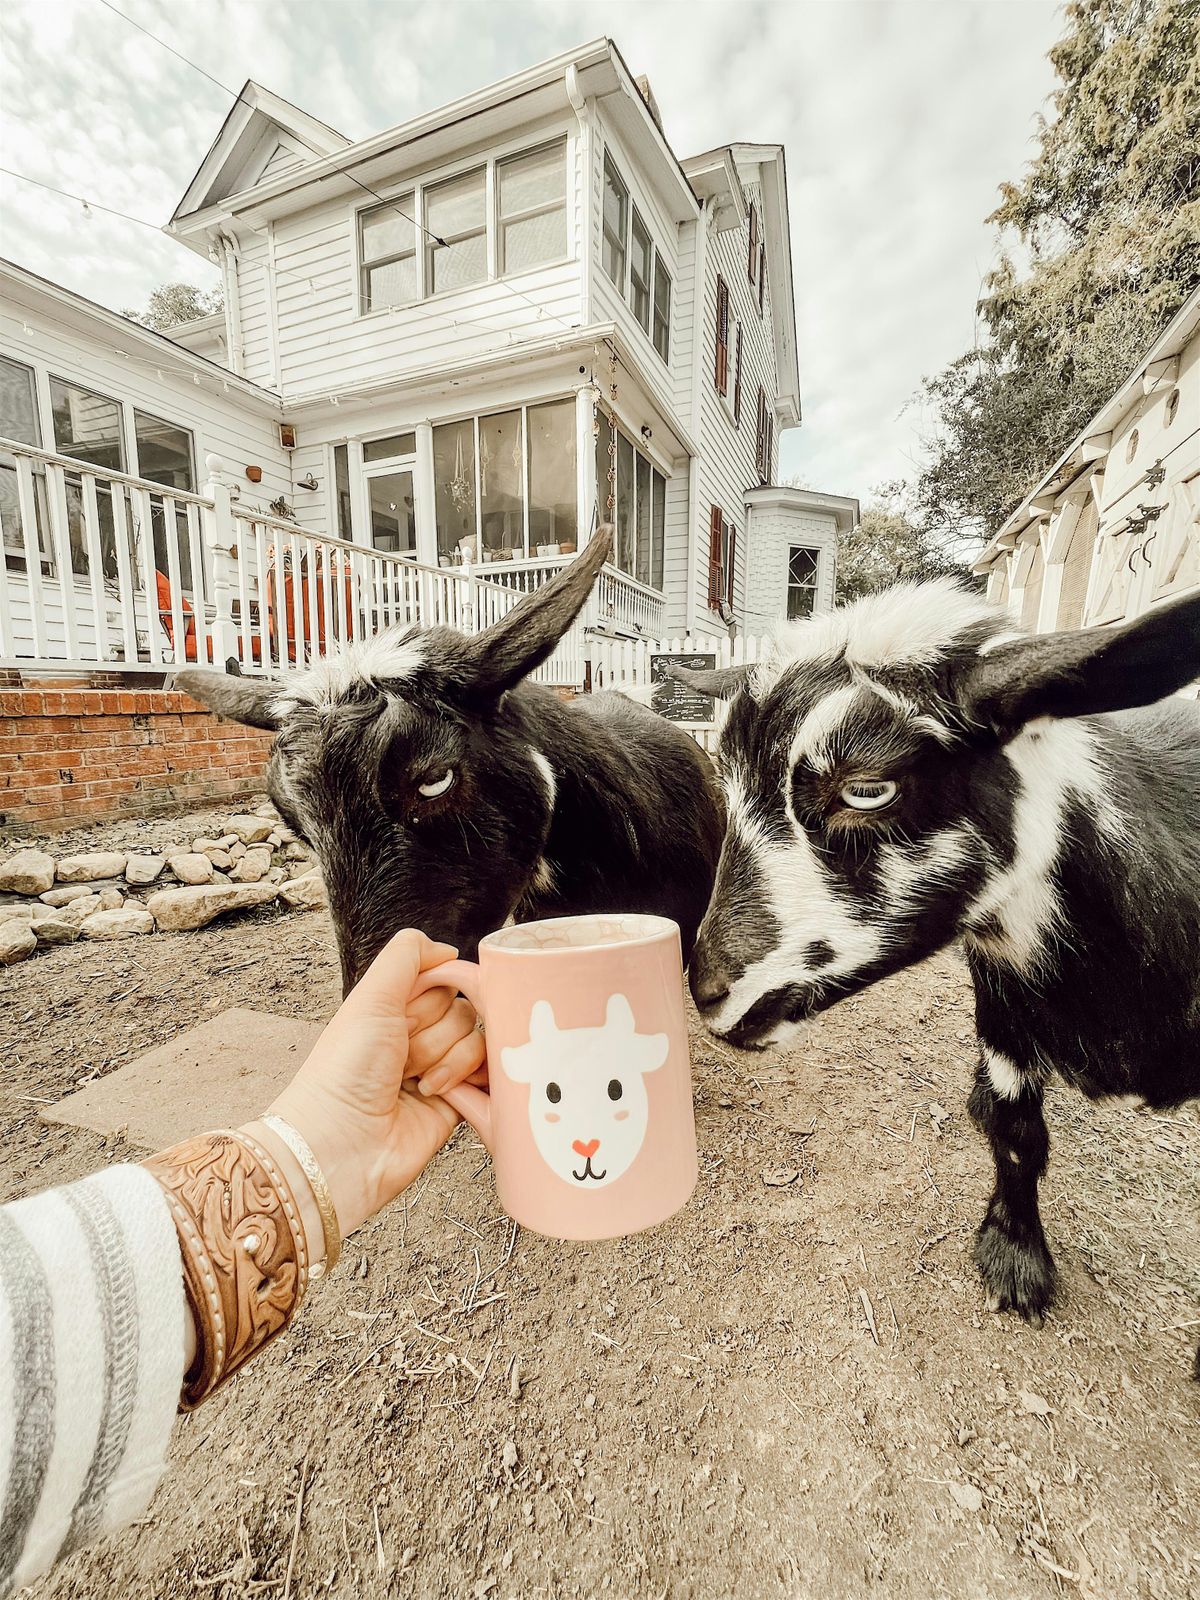 Paint Pottery with Baby Highland Calf & Goats